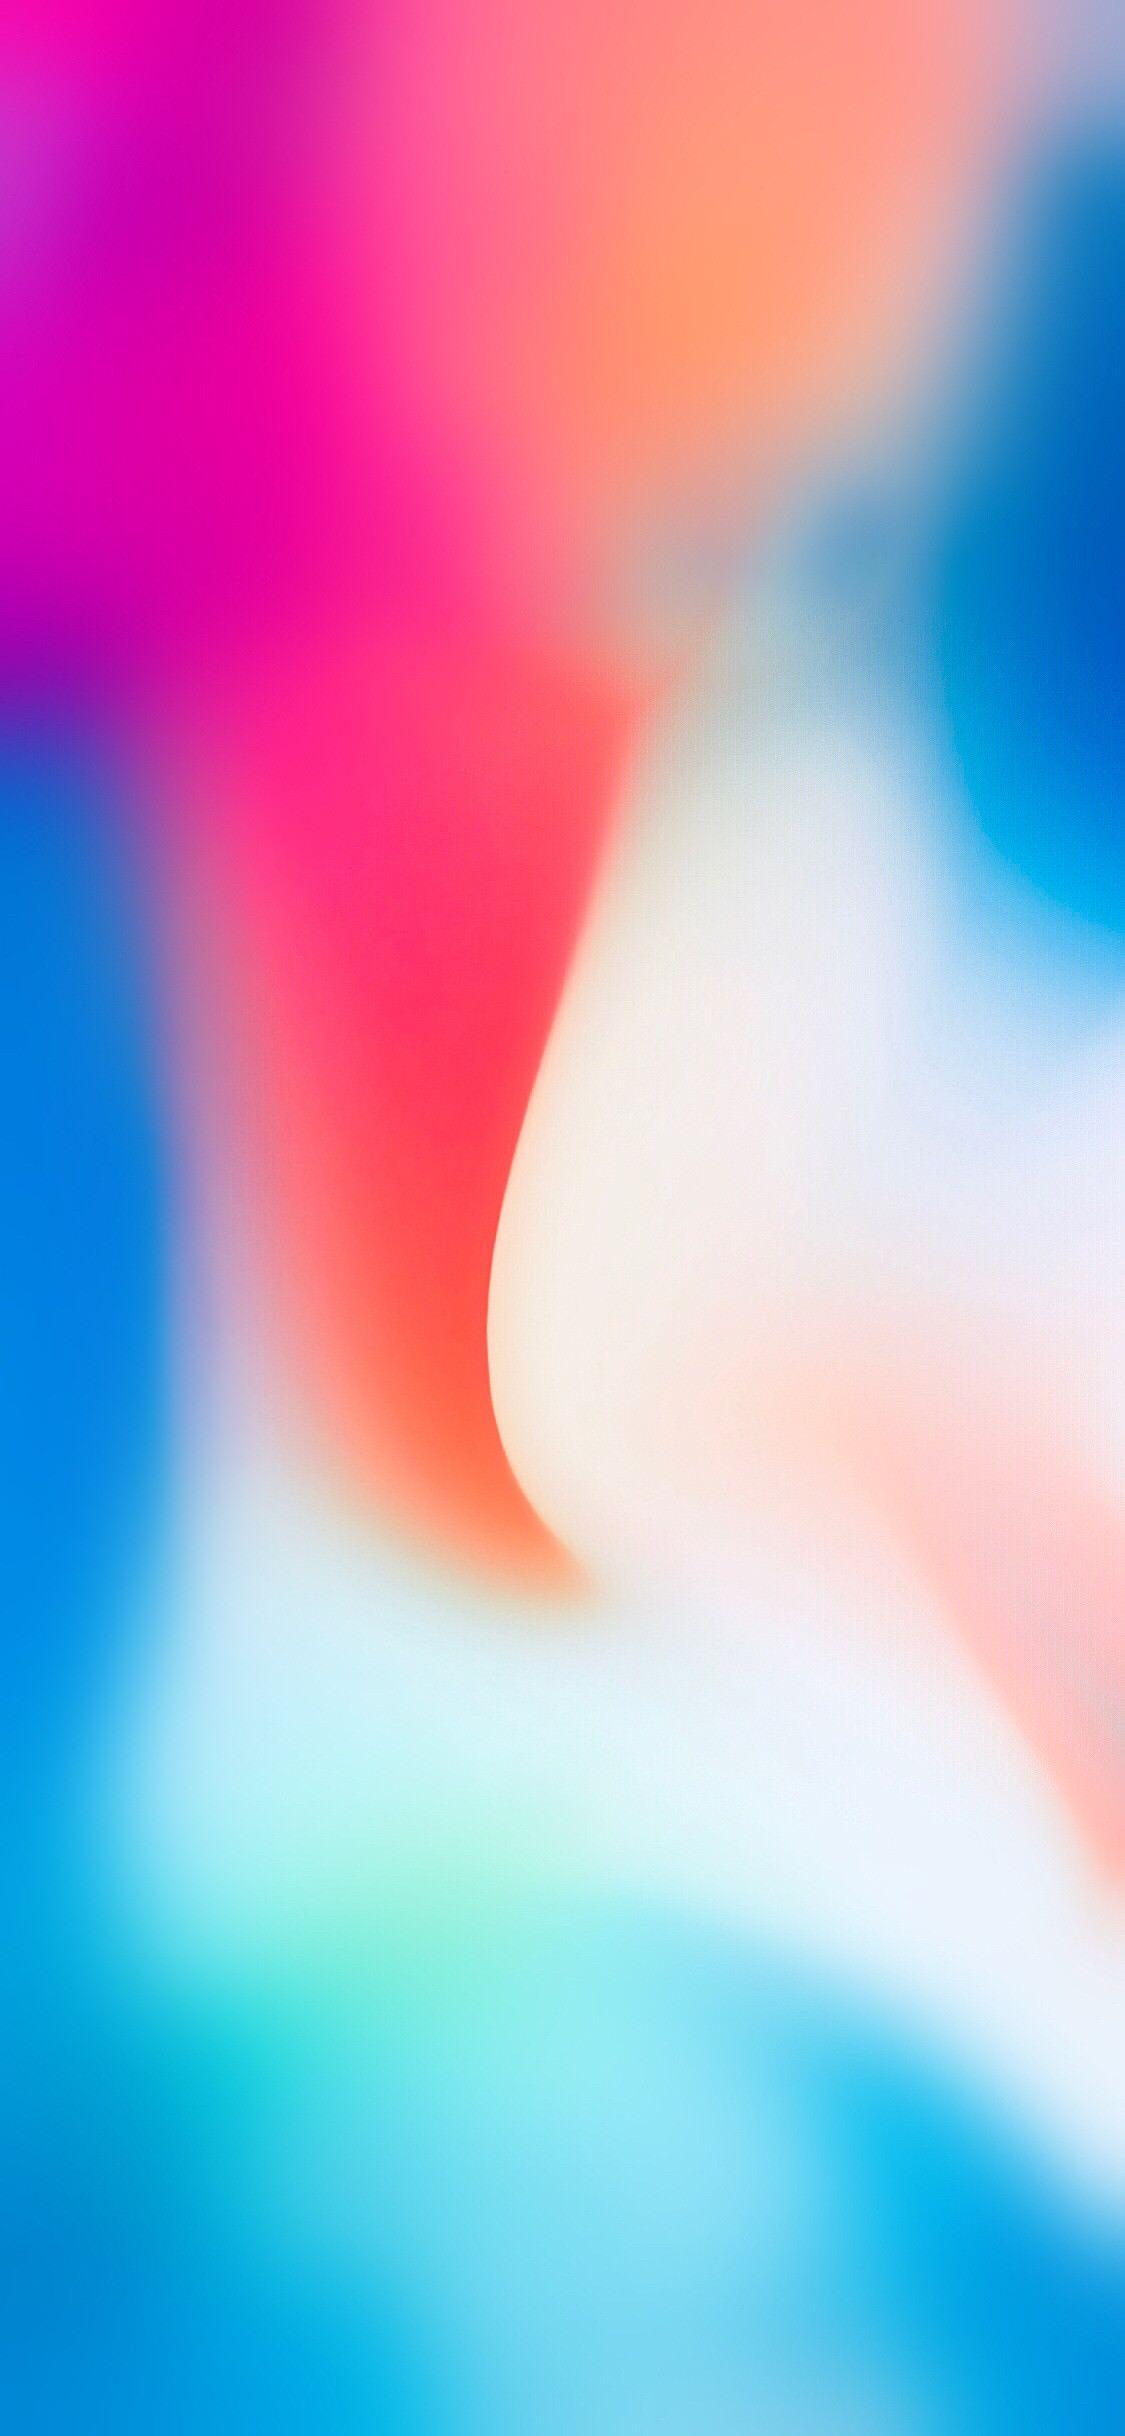 Finally I found the commercial iPhone X wallpaper :) Wanted